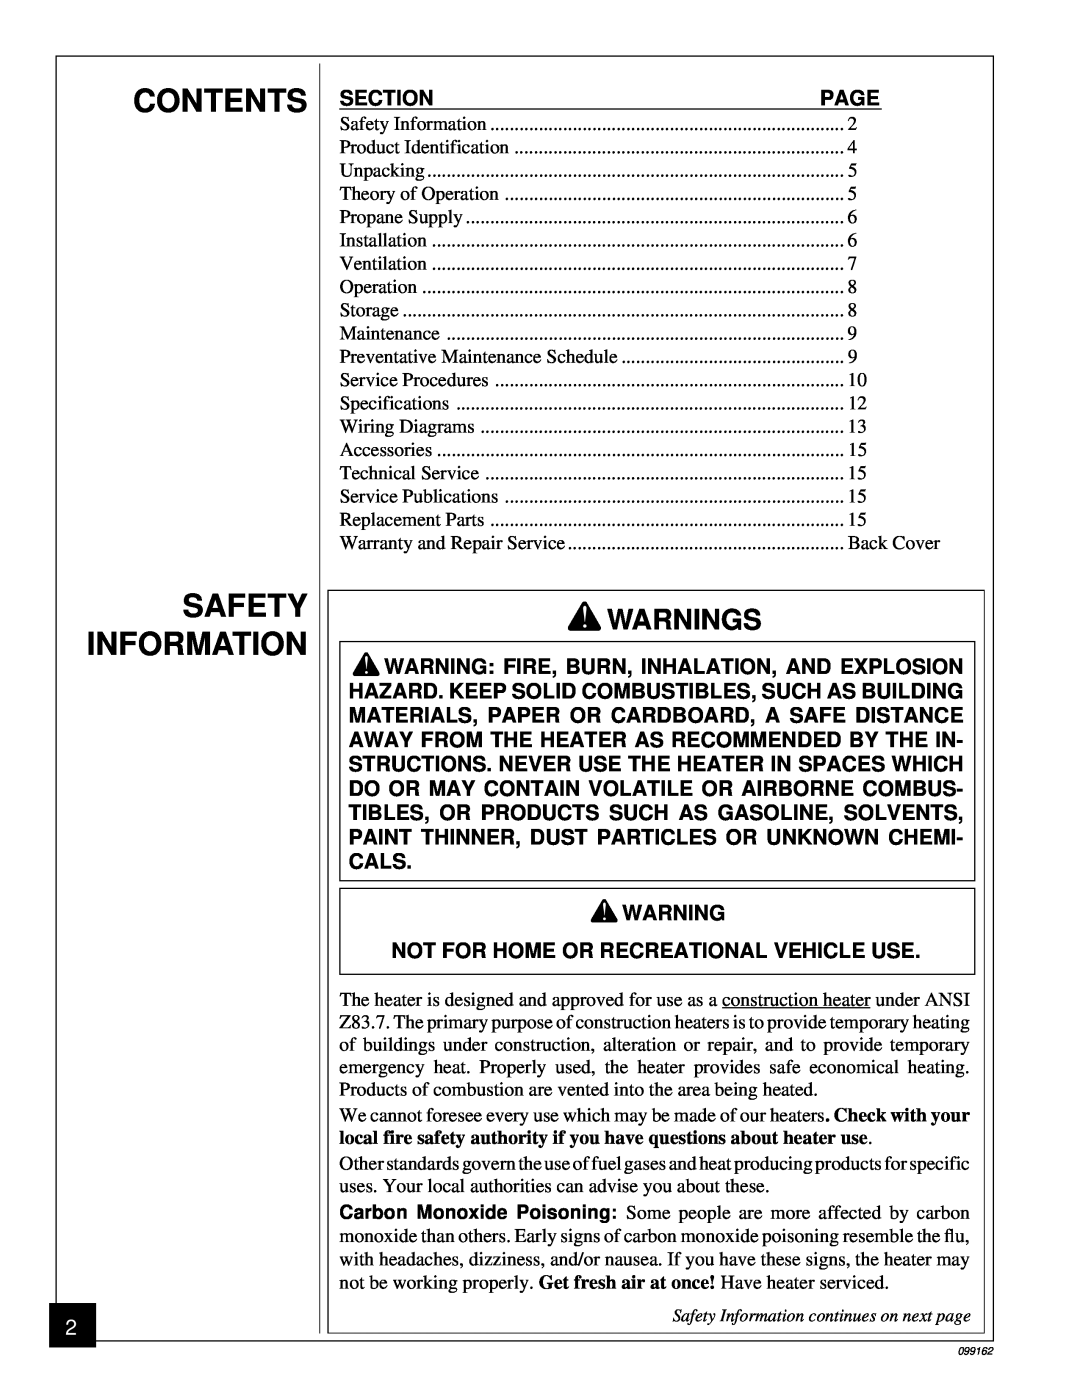 Desa ROPANE CONSTRUCTION HEATERS owner manual Contents Safety Information, Warnings 